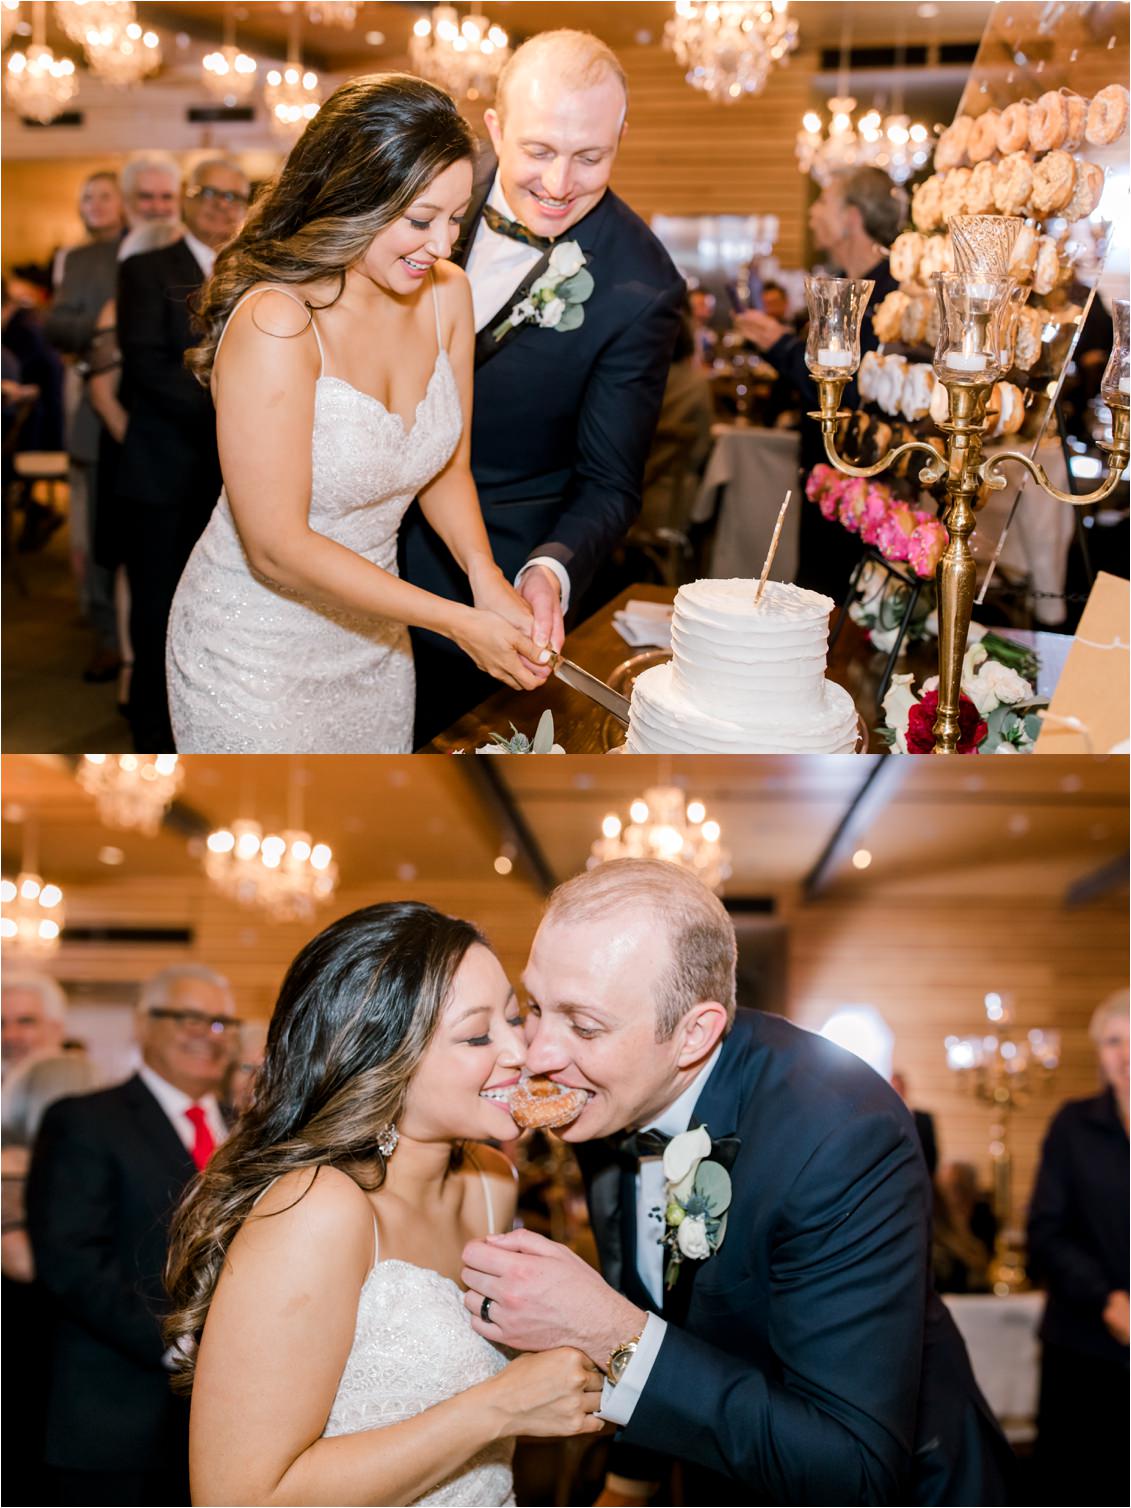 Wedding at Jack Guenther Pavilion by Gaby Caskey Photography